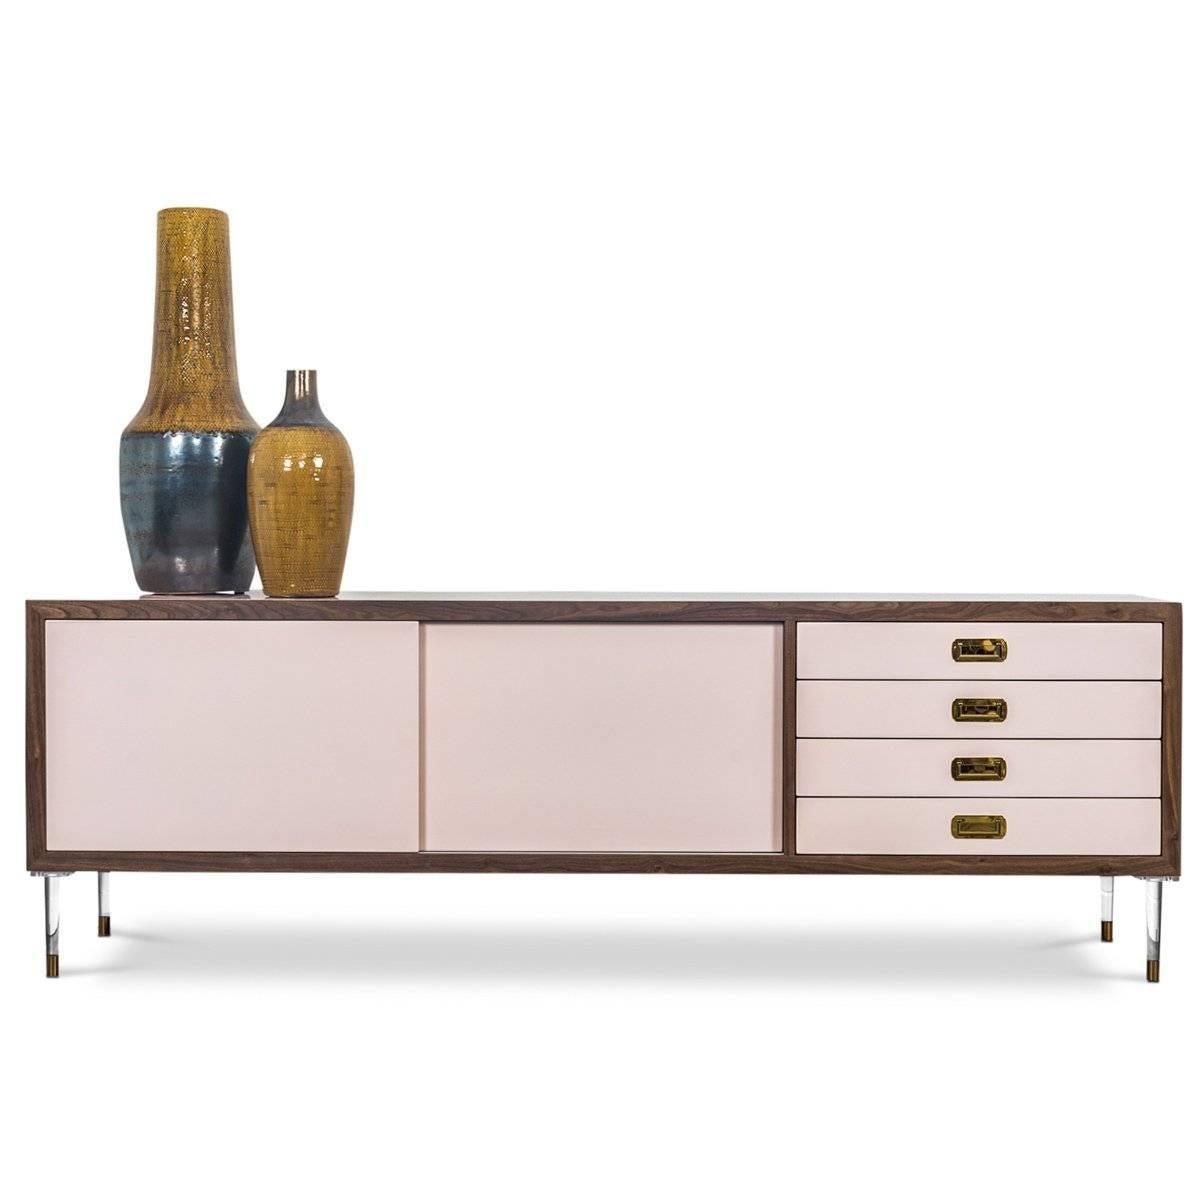 Introducing our new St. Martin credenza featuring two sliding doors and four drawers to maximize its functionality while still being stylish and chic. This retro-modern design features an oiled walnut trim, brass hardware, our famous blush pink